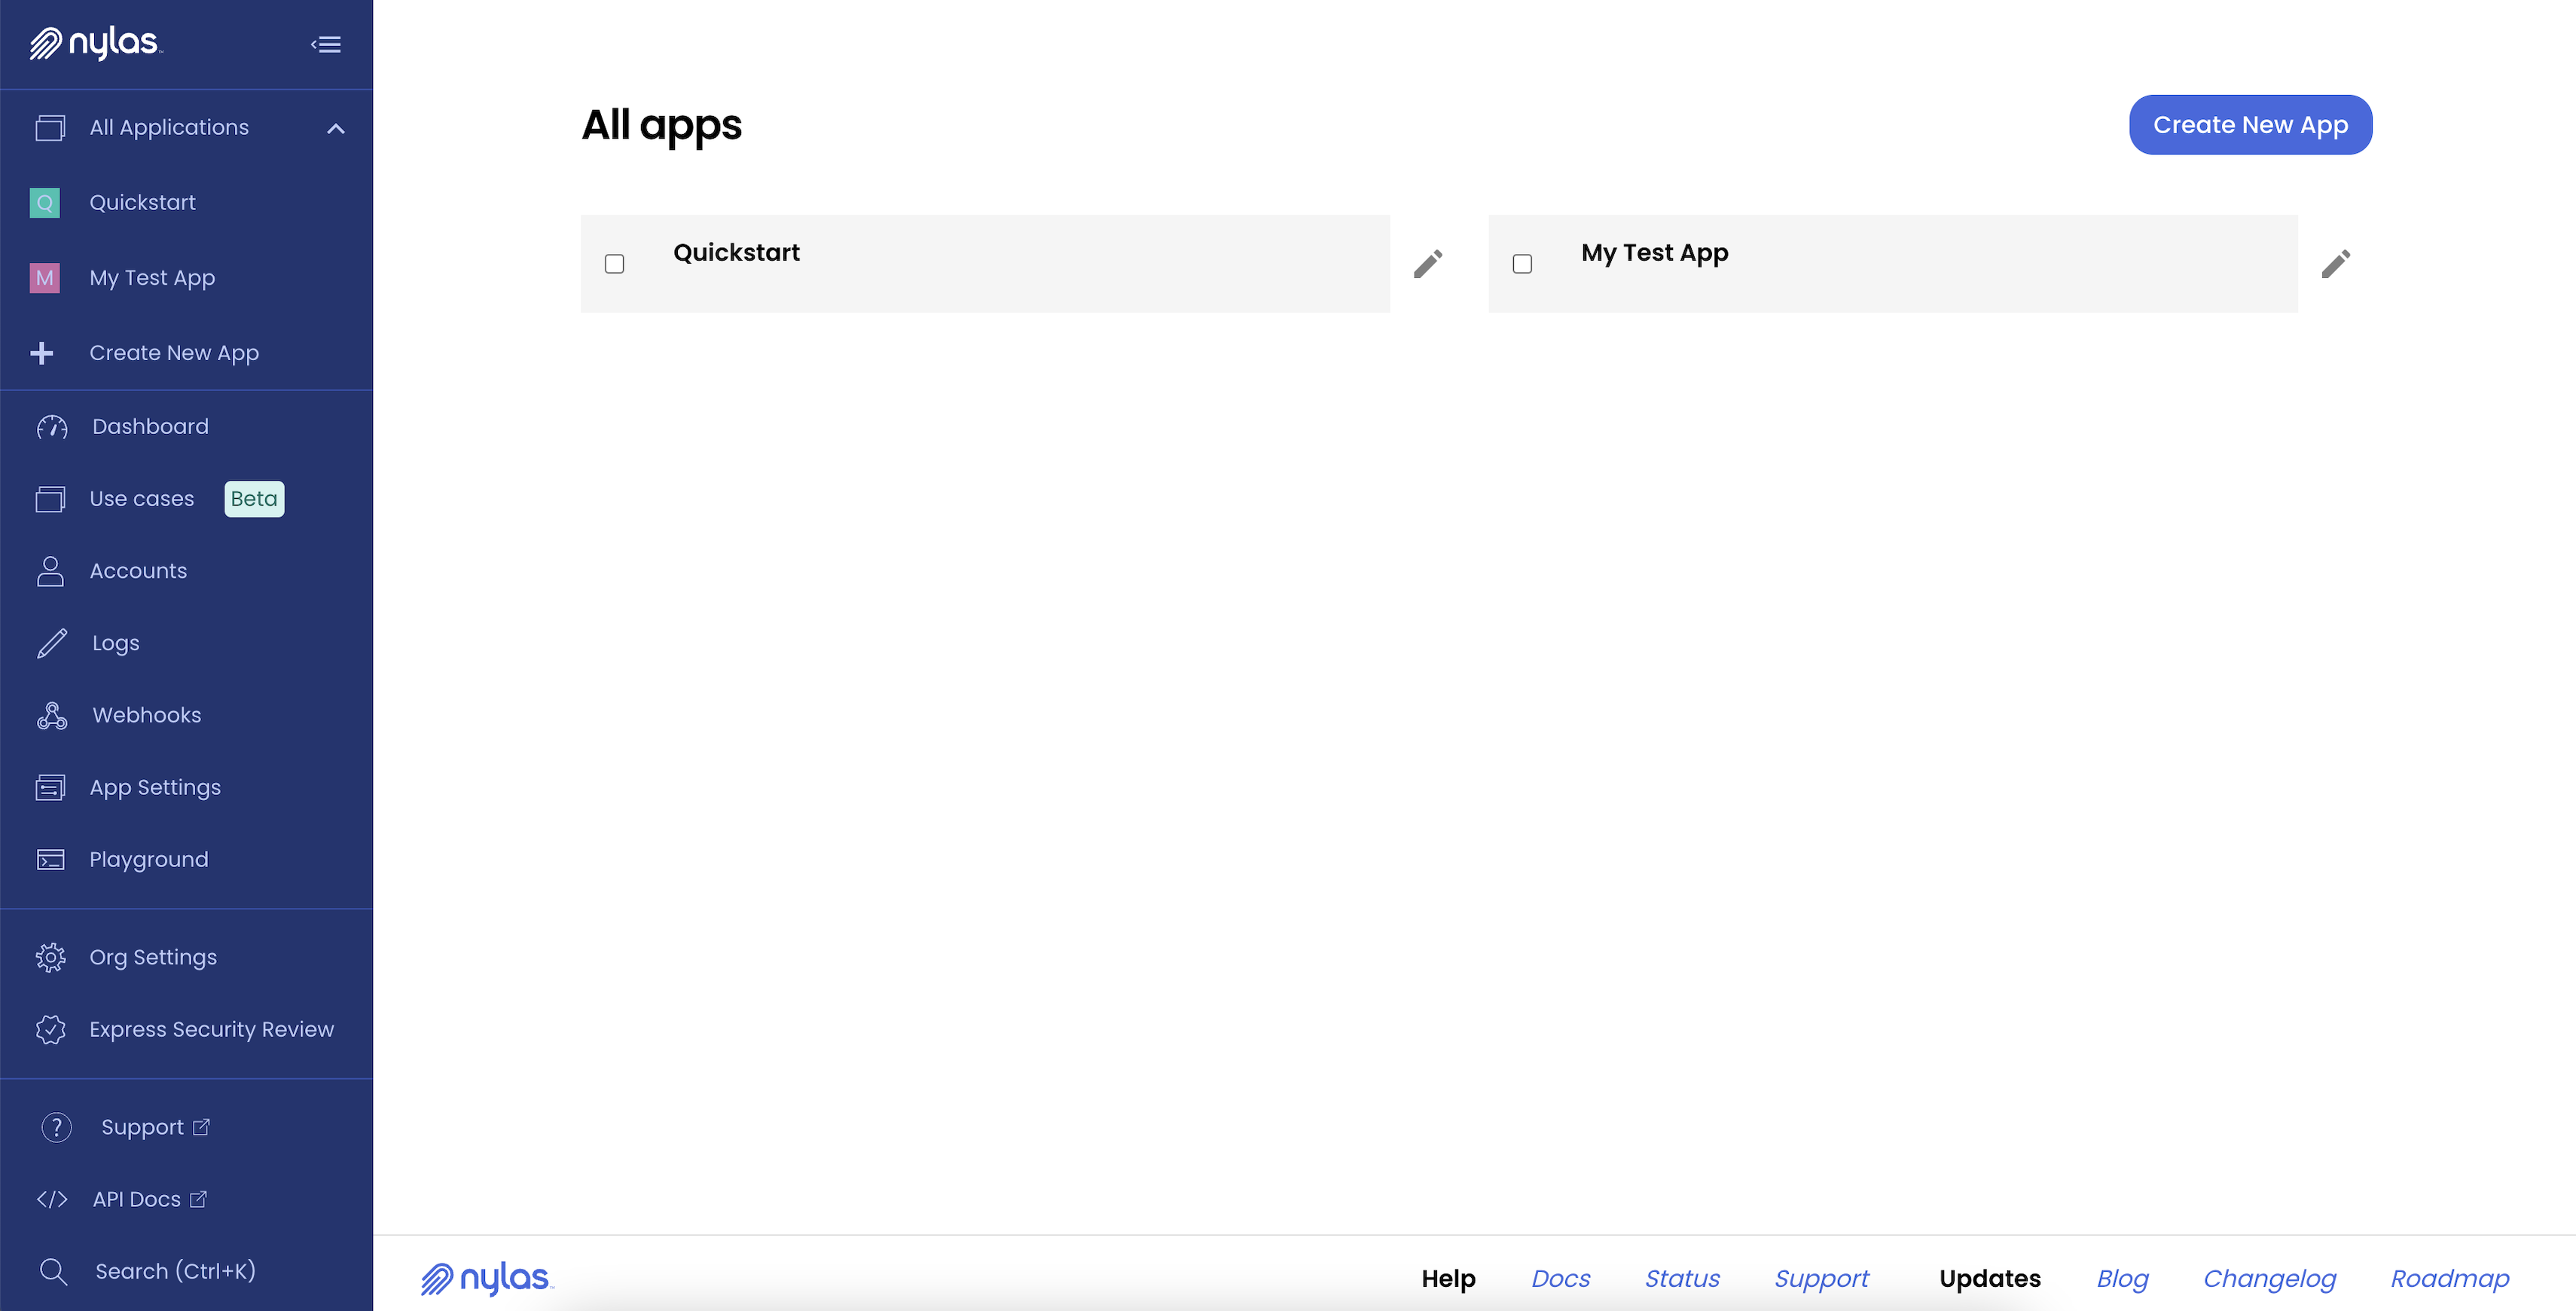 The Nylas Dashboard displaying the "All apps" page. Two applications are listed.